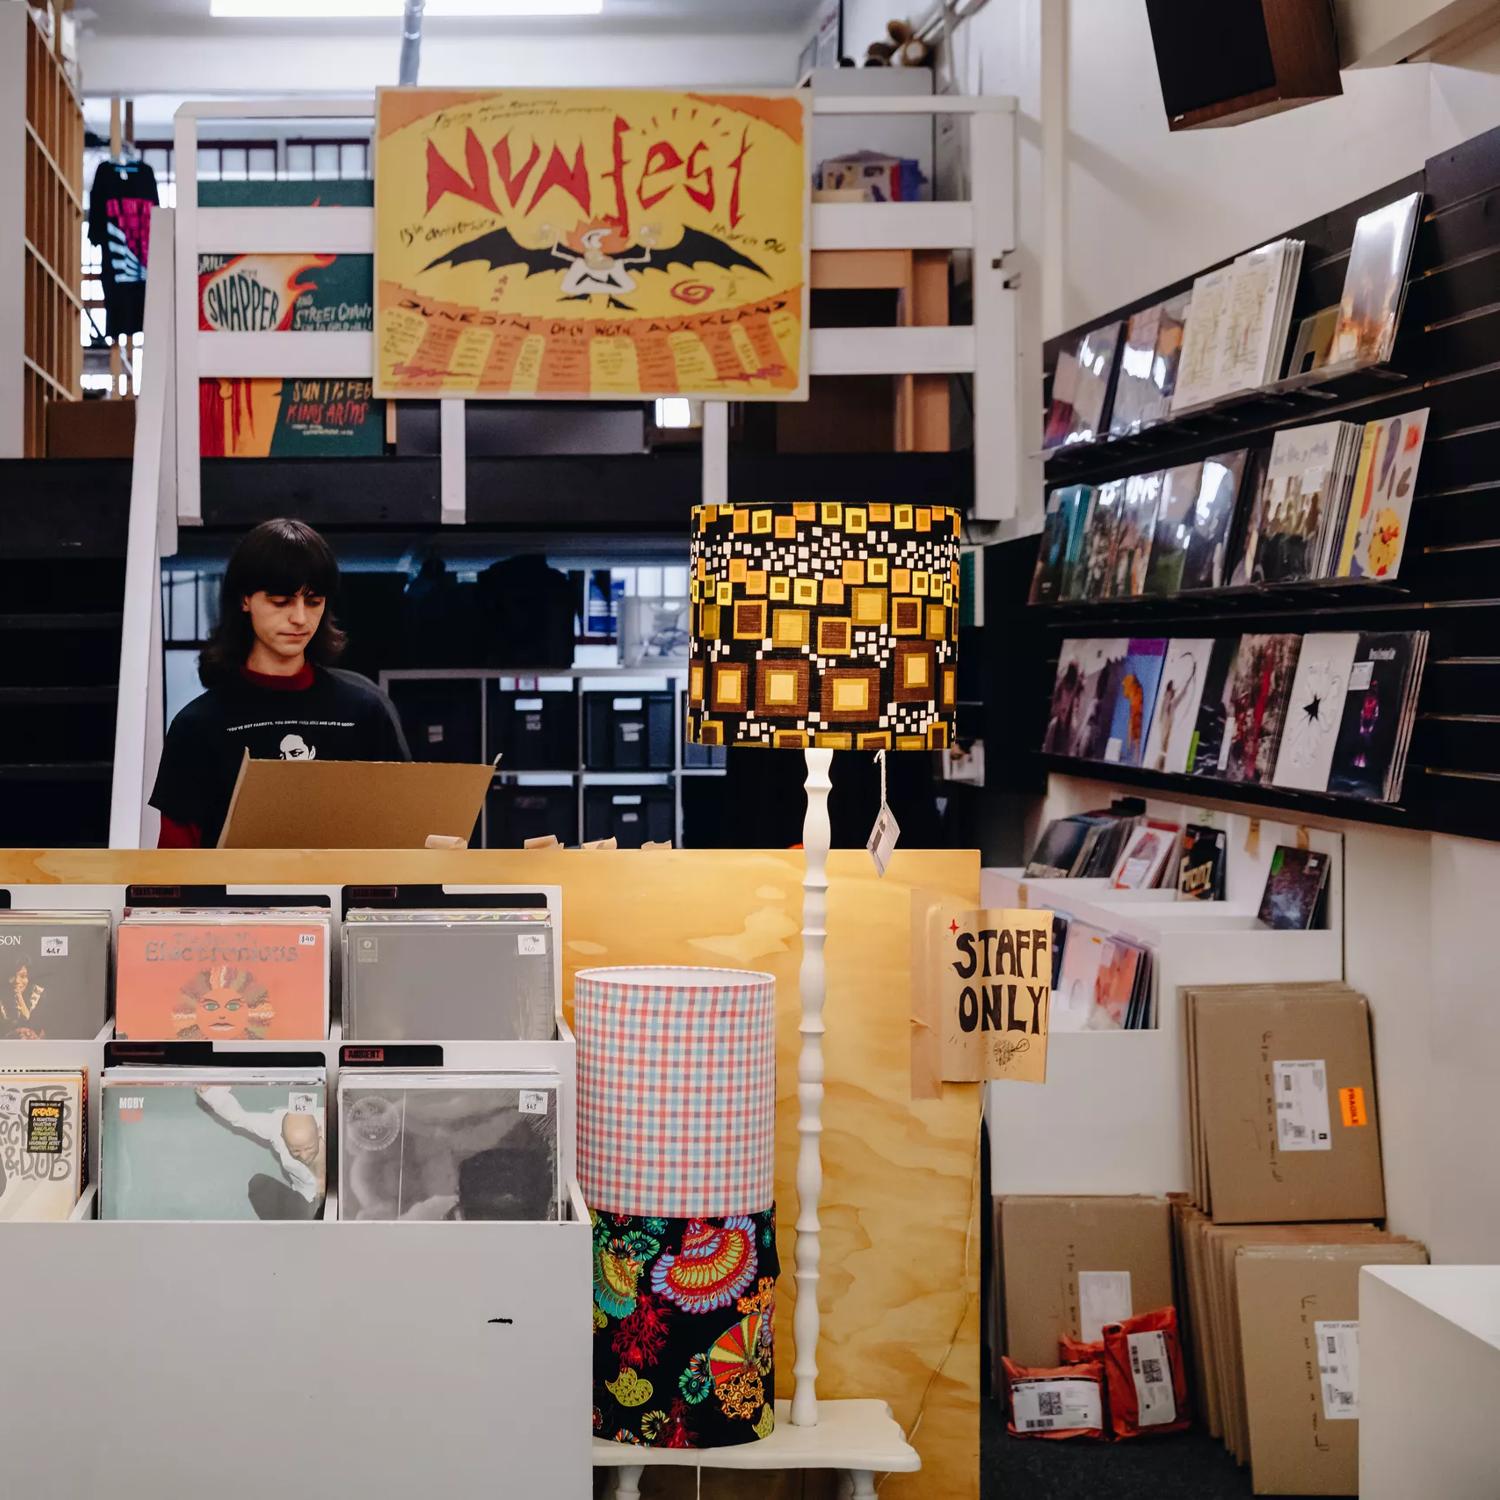 The interior of Flying Nun, a record store located on Cuba Street in Te Aro, Wellington. A worker is standing behind the counter surrounded by vinyl records. 